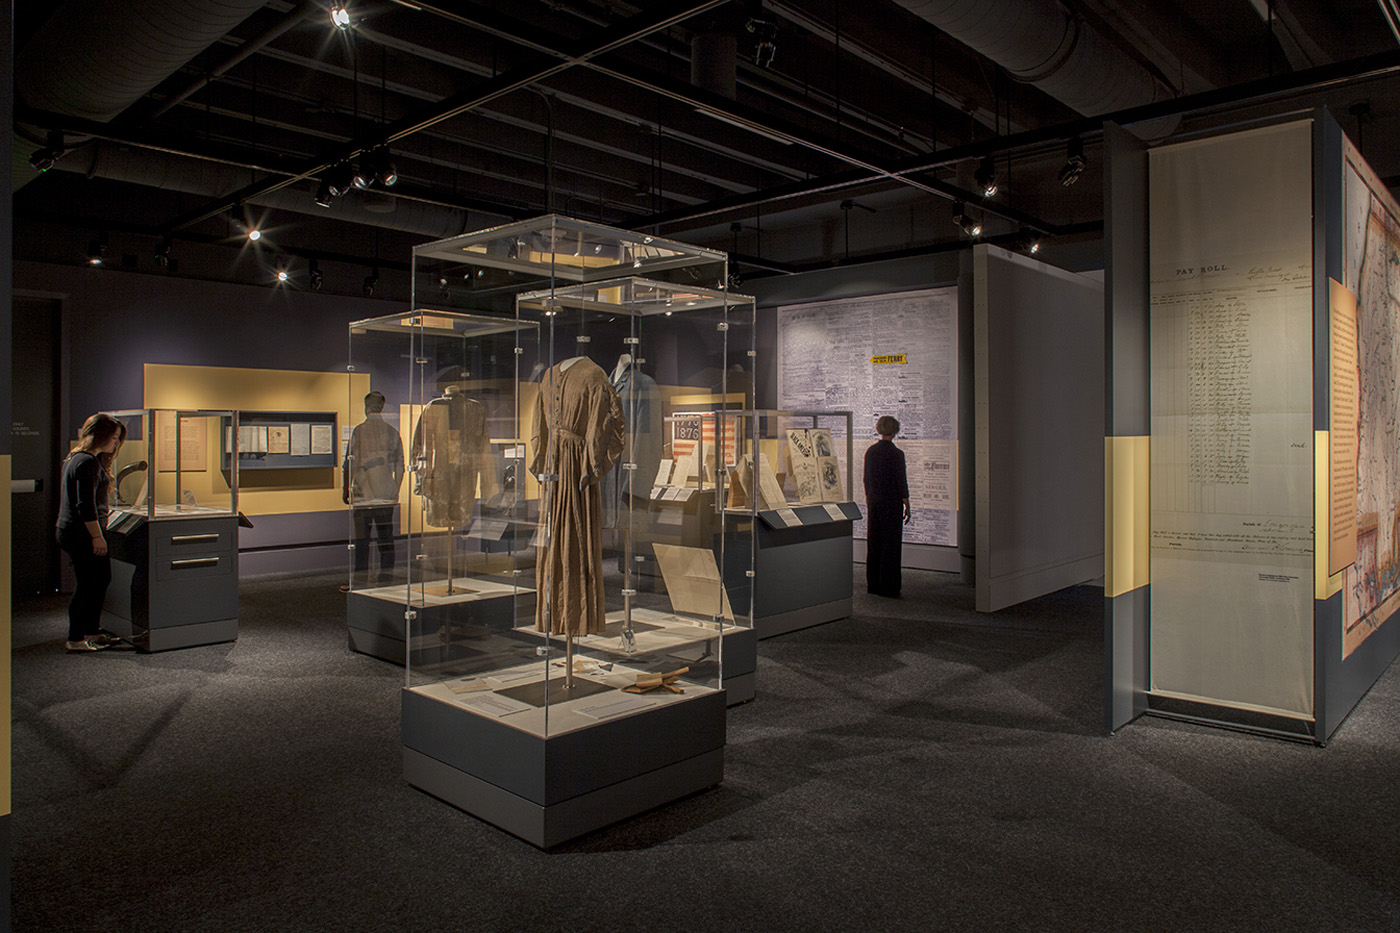 Large dim exhibit room with three display cases showing historic attire.